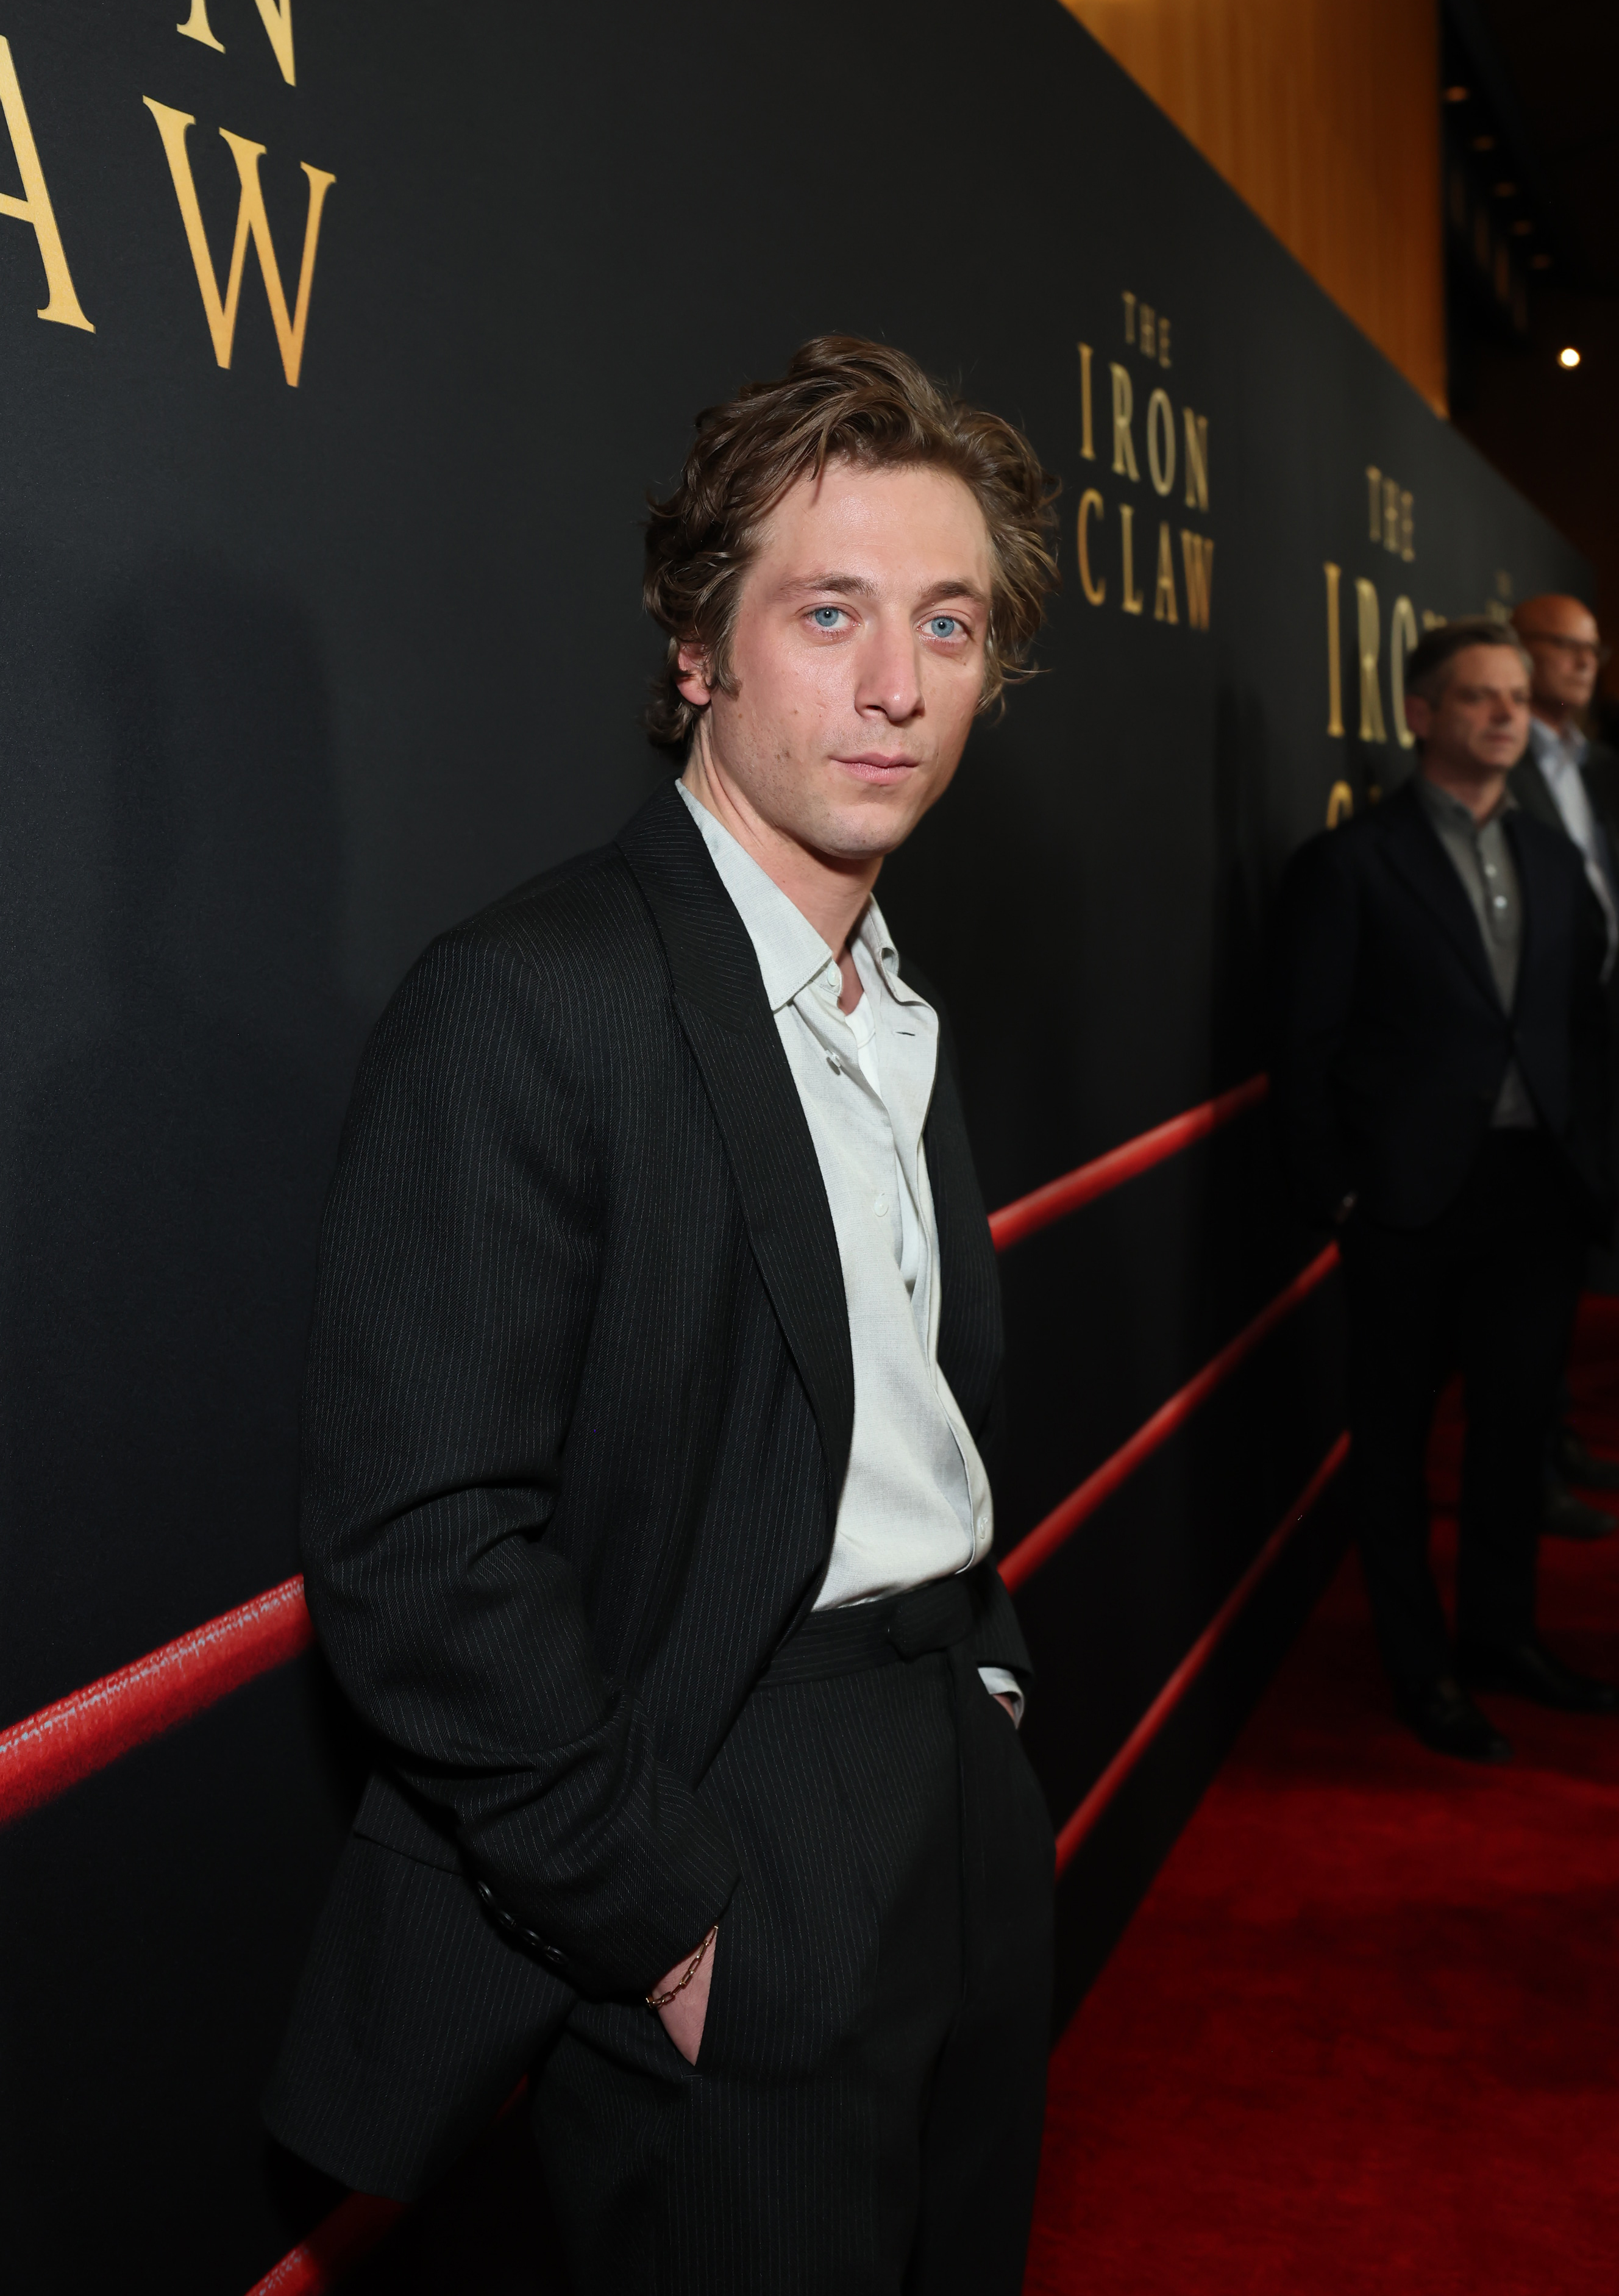 Jeremy Allen White at the premiere of "The Iron Claw" at Directors Guild of America on December 11, 2023 in Los Angeles, California | Source: Getty Images